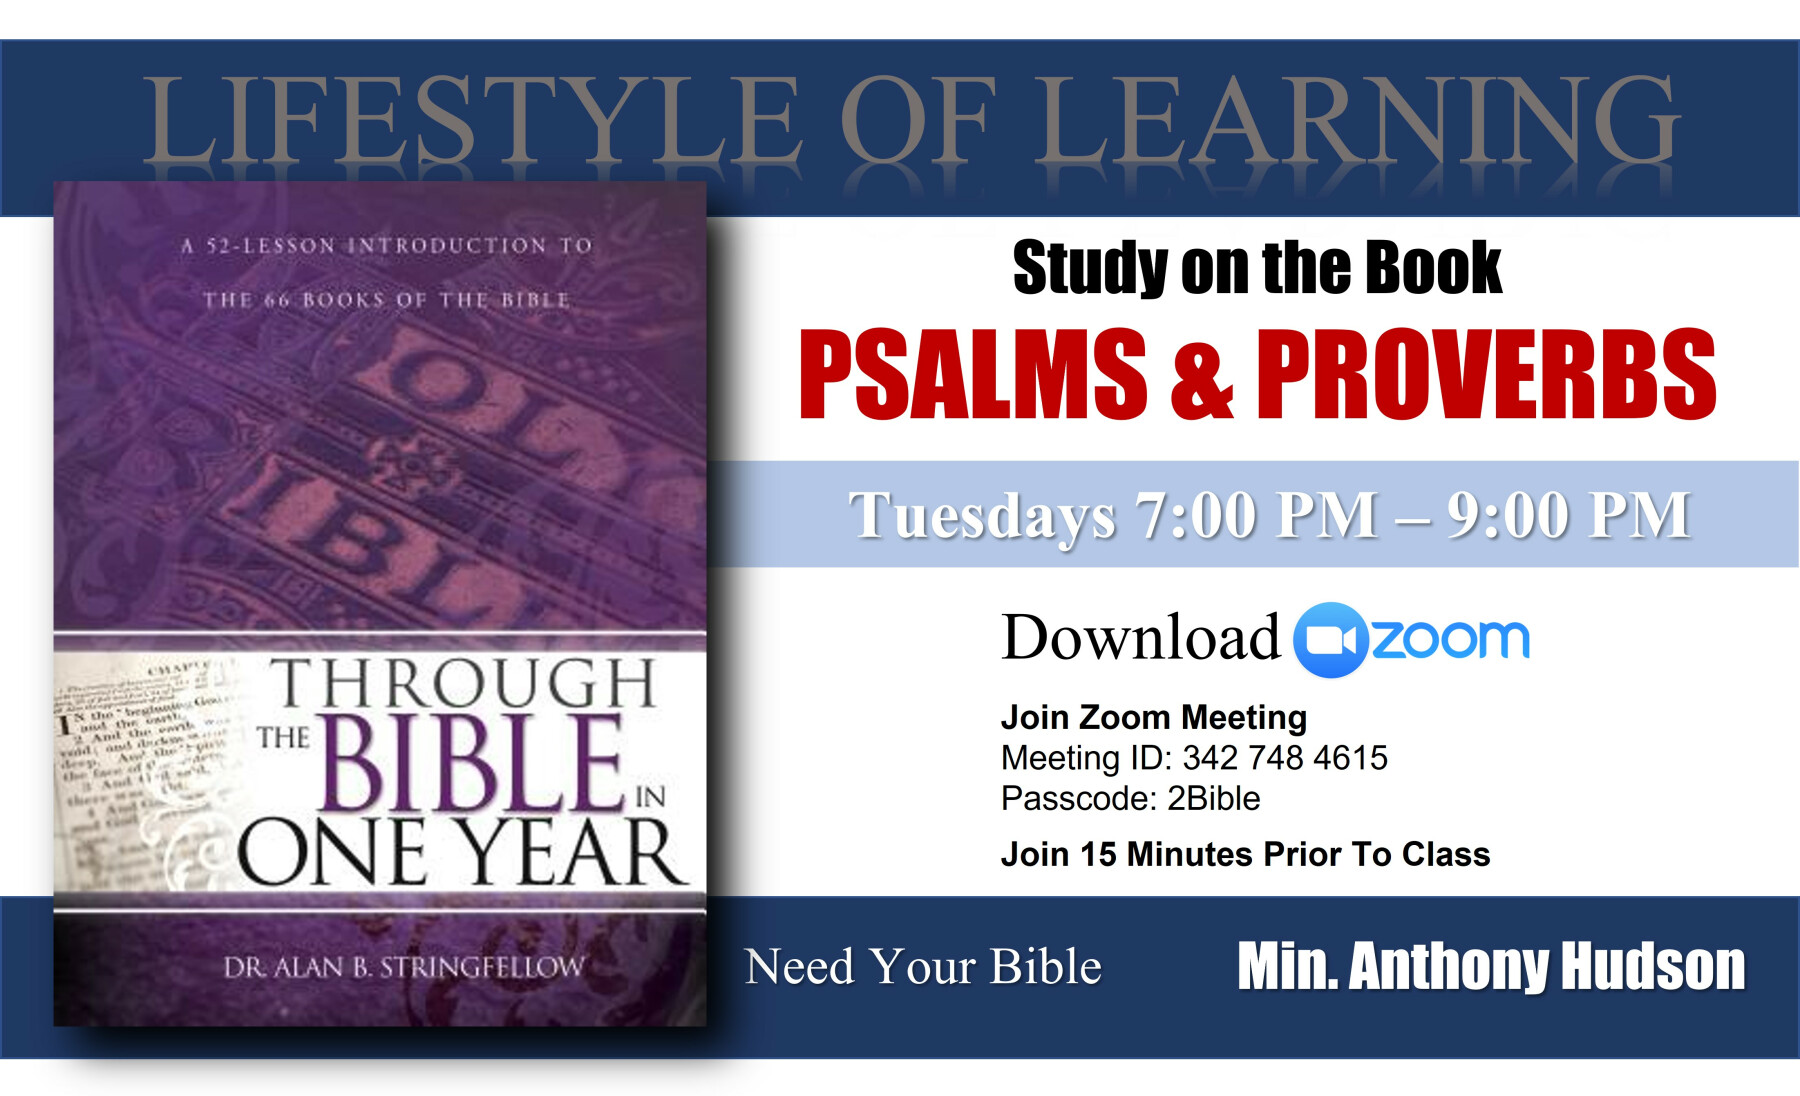 Study on the Book of Psalms